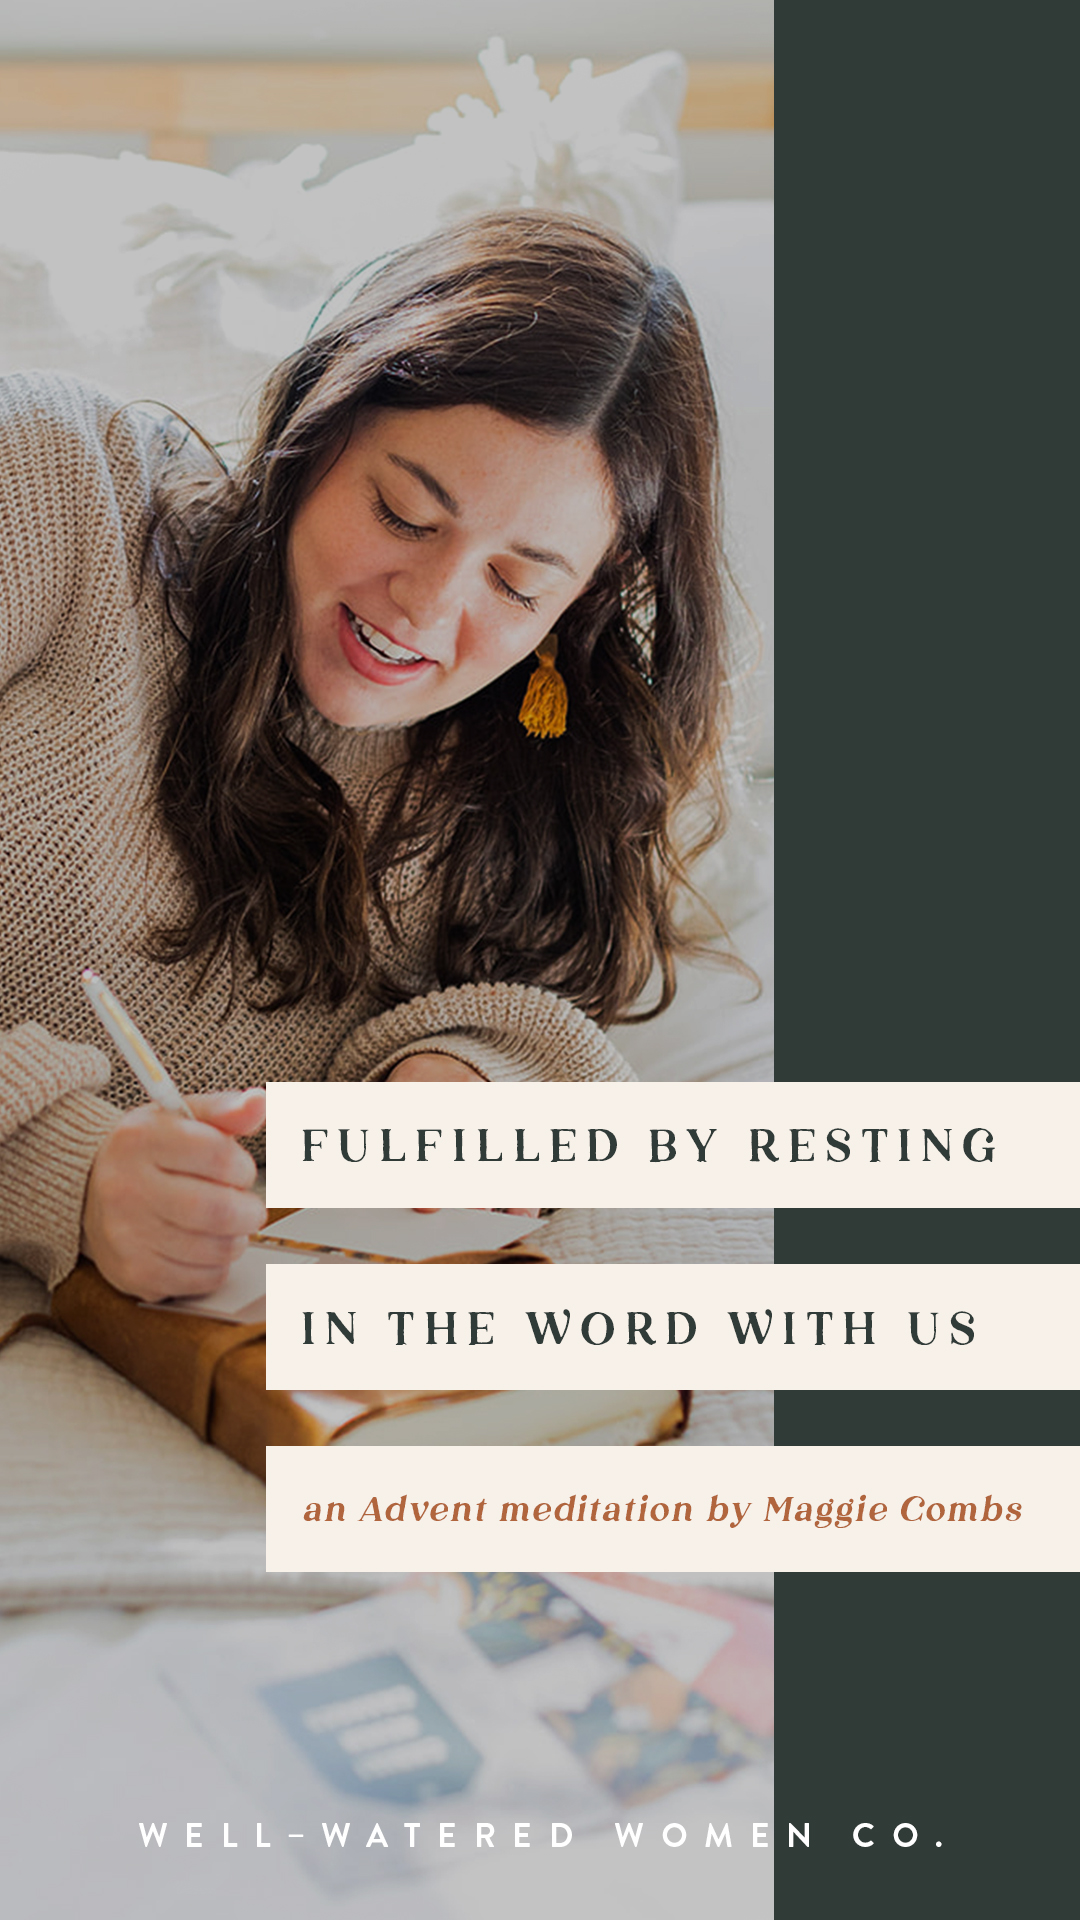 Fulfilled by Resting In His Word, an Advent Meditation from Well-Watered Women